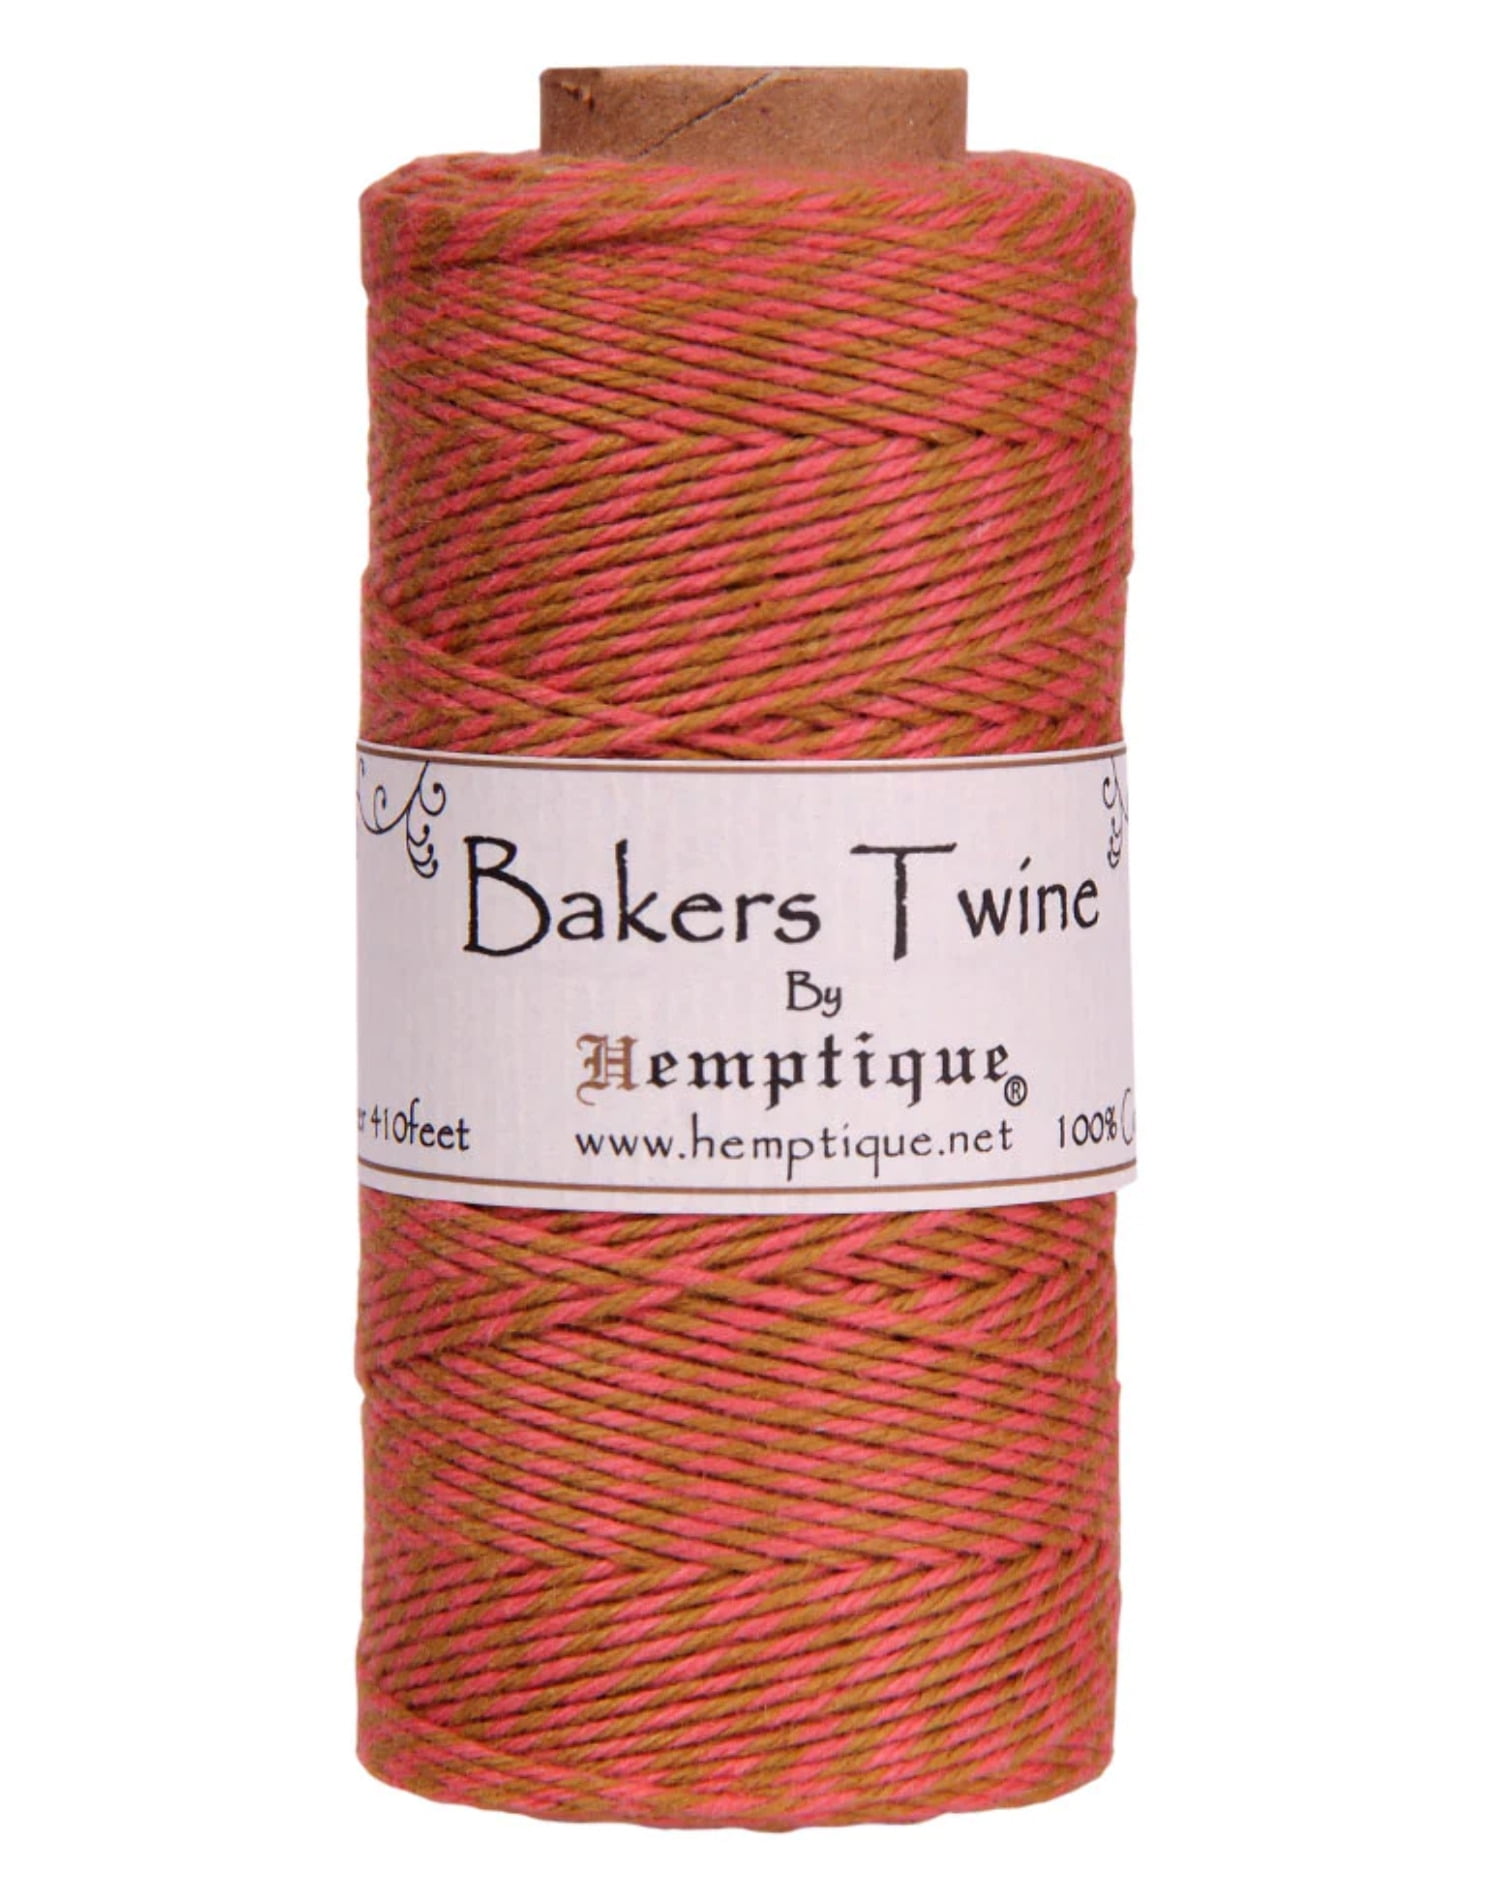 Colored 2mm Bakery Twine, 100m Assorted Raspberry Sorbet Bakers Cotton  Twine, Cotton String - Buy Colored 2mm Bakery Twine, 100m Assorted  Raspberry Sorbet Bakers Cotton Twine, Cotton String Product on